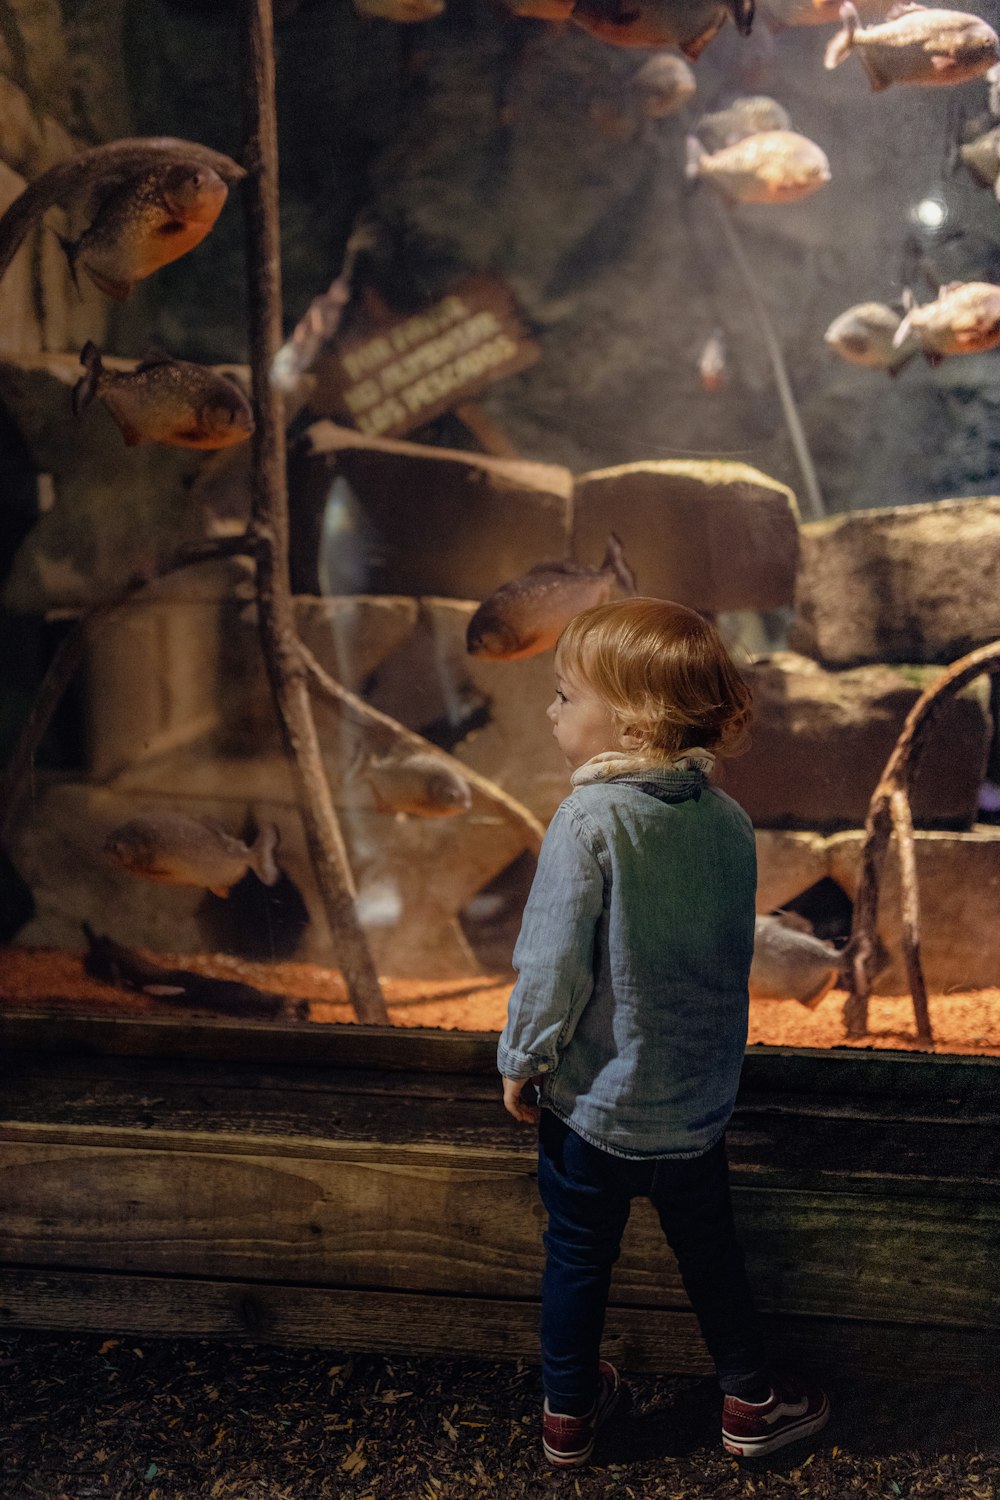 a child looking at a display of fish